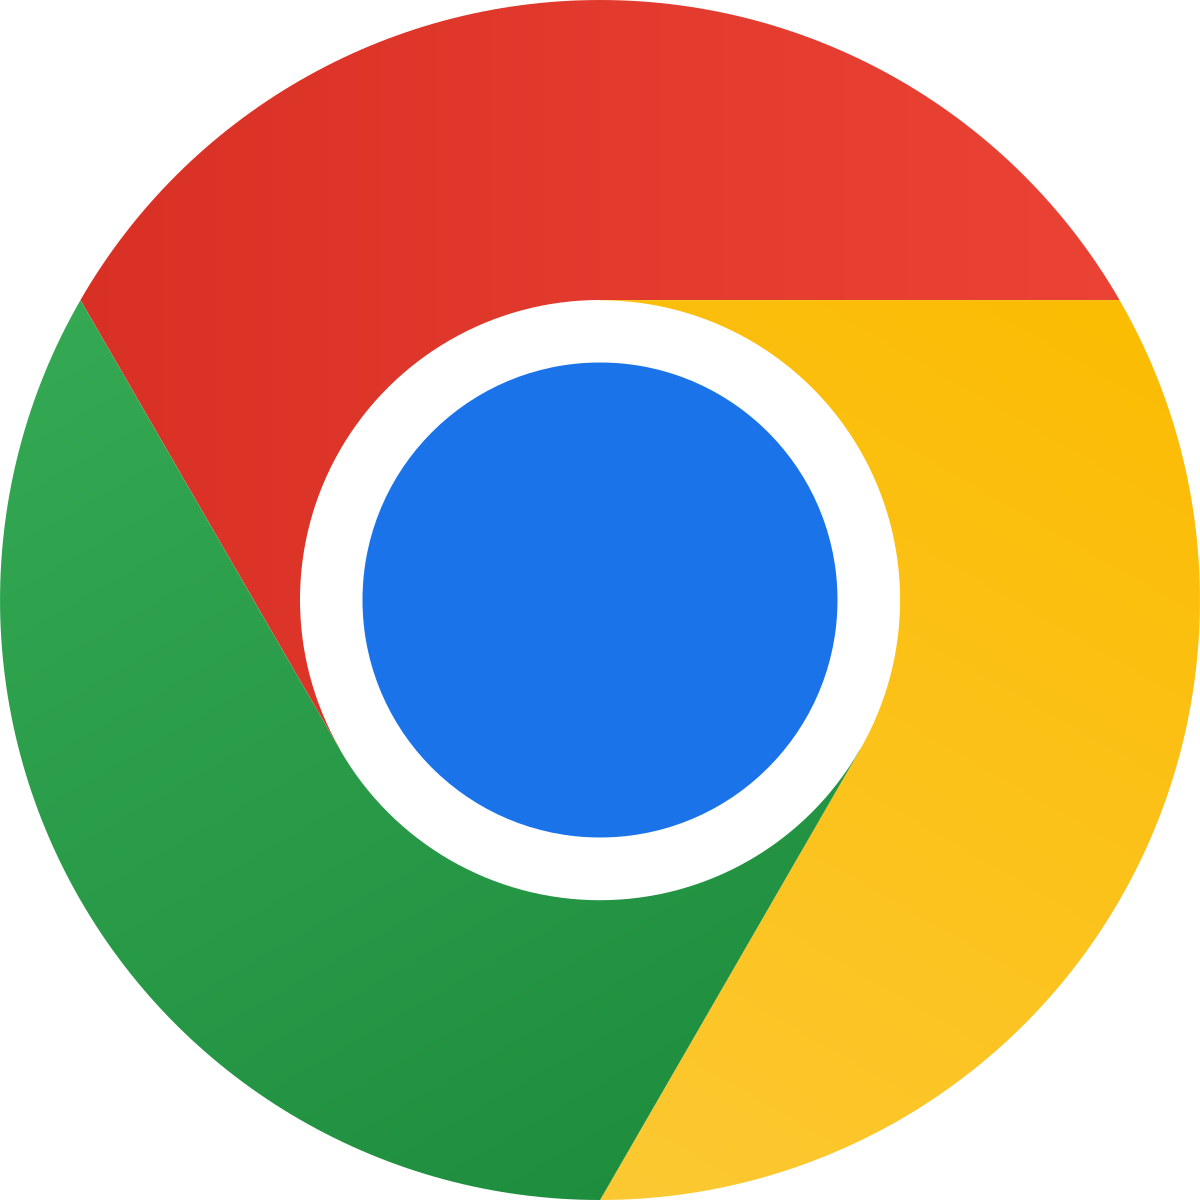 Chrome browser settings interface